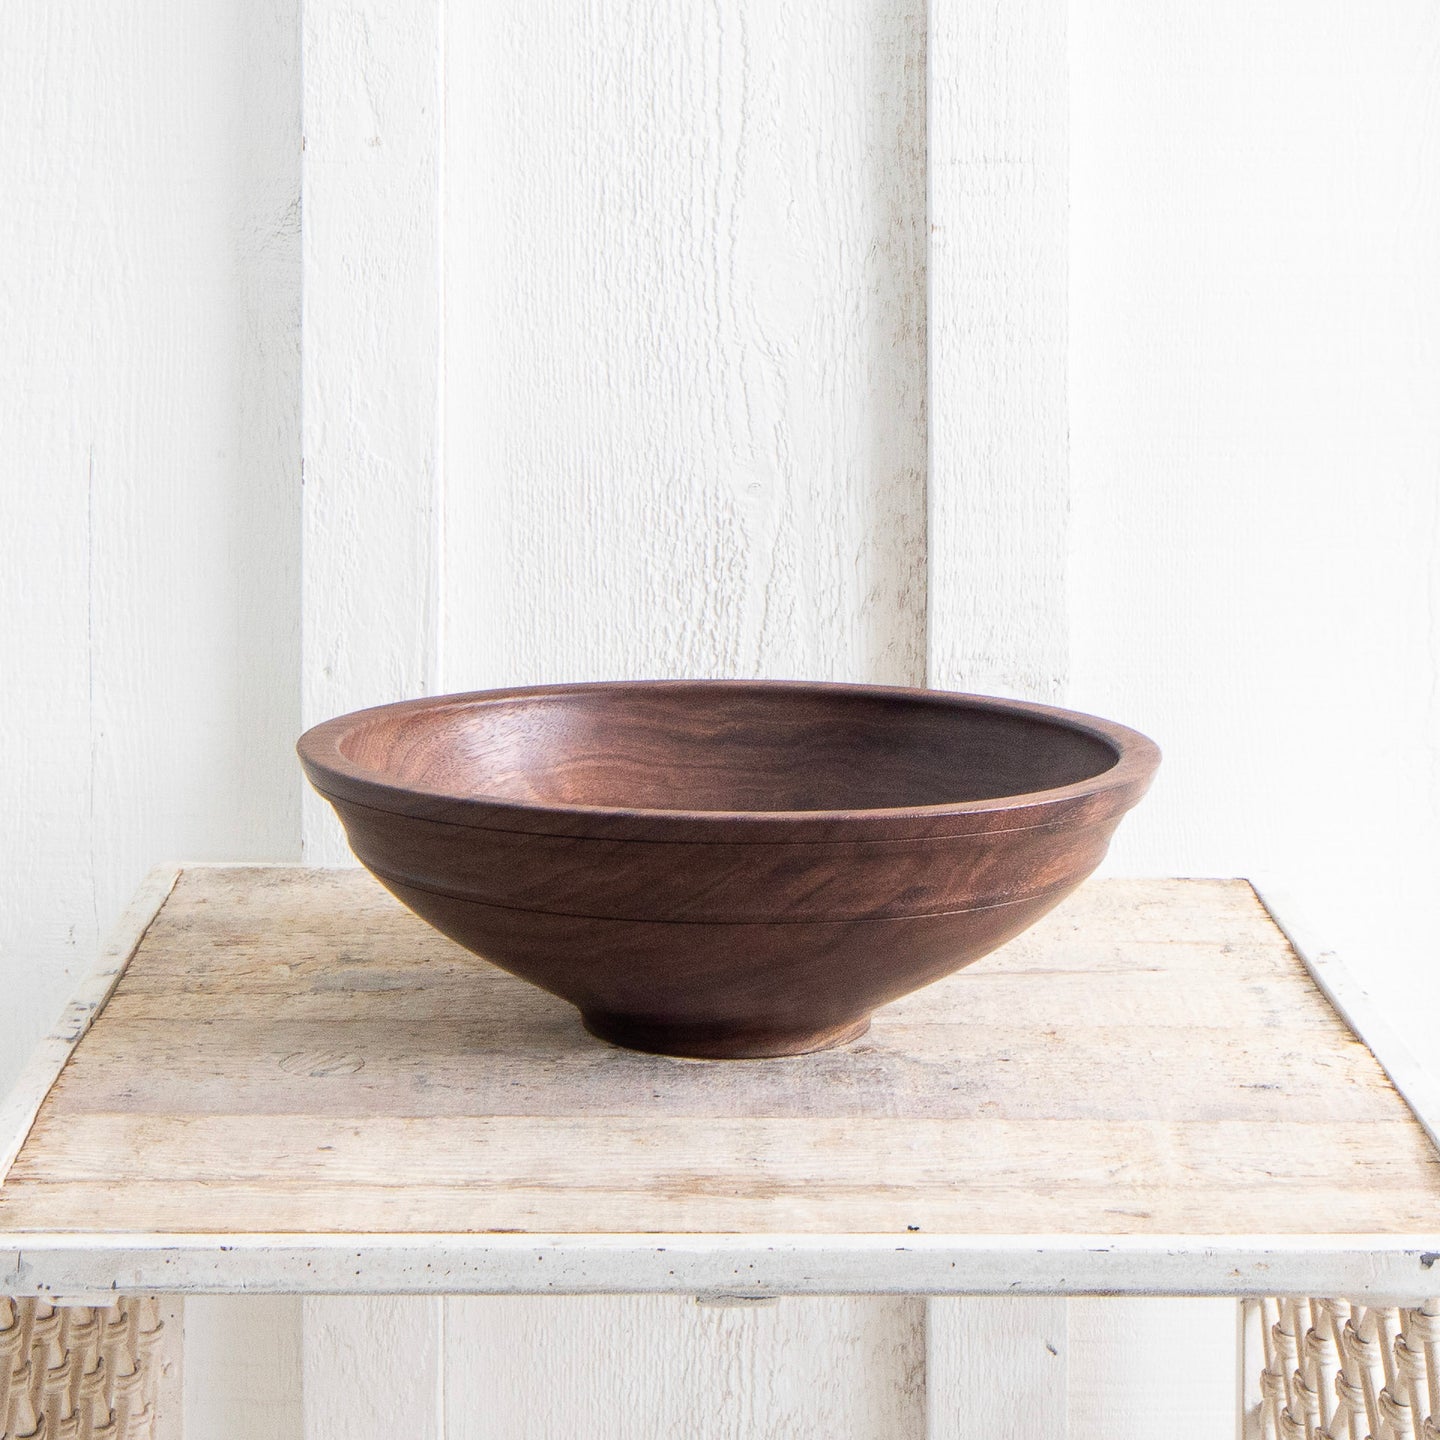 Andrew Pearce <br> Walnut Willoughby Bowls